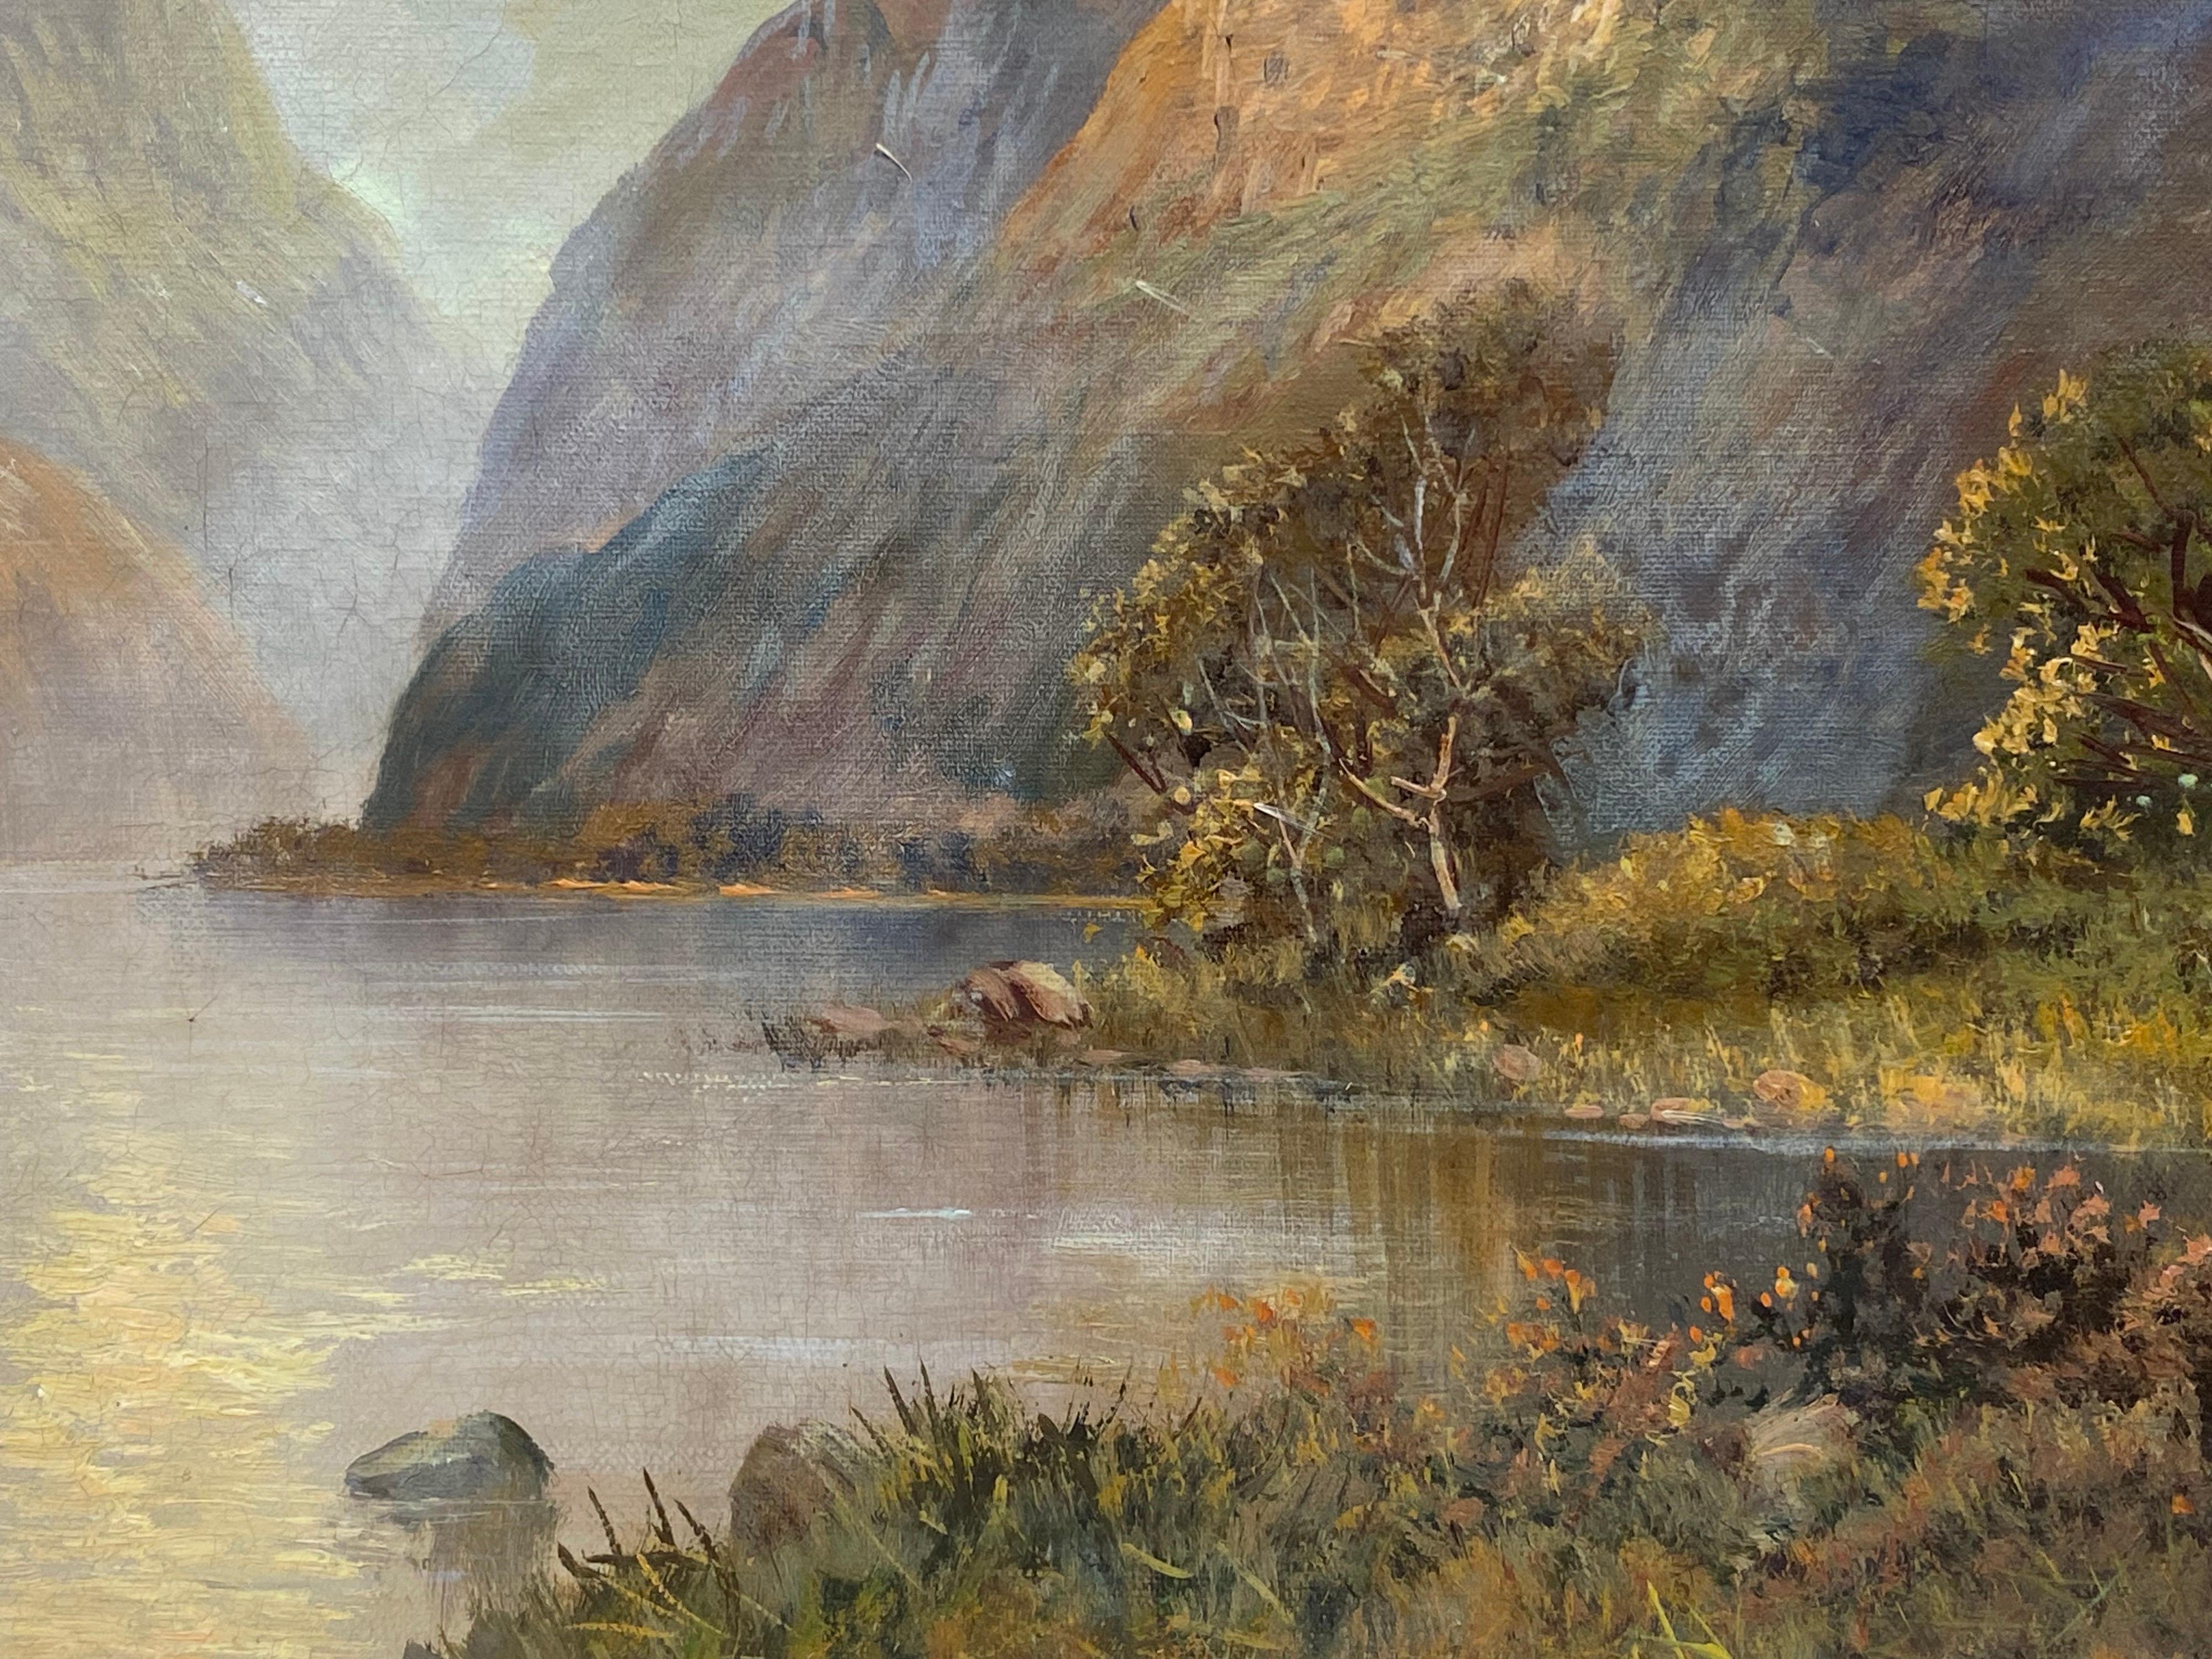 Antique Scottish Highlands Oil Painting Summer Loch Scene with Mountains - Gray Figurative Painting by Francis E. Jamieson